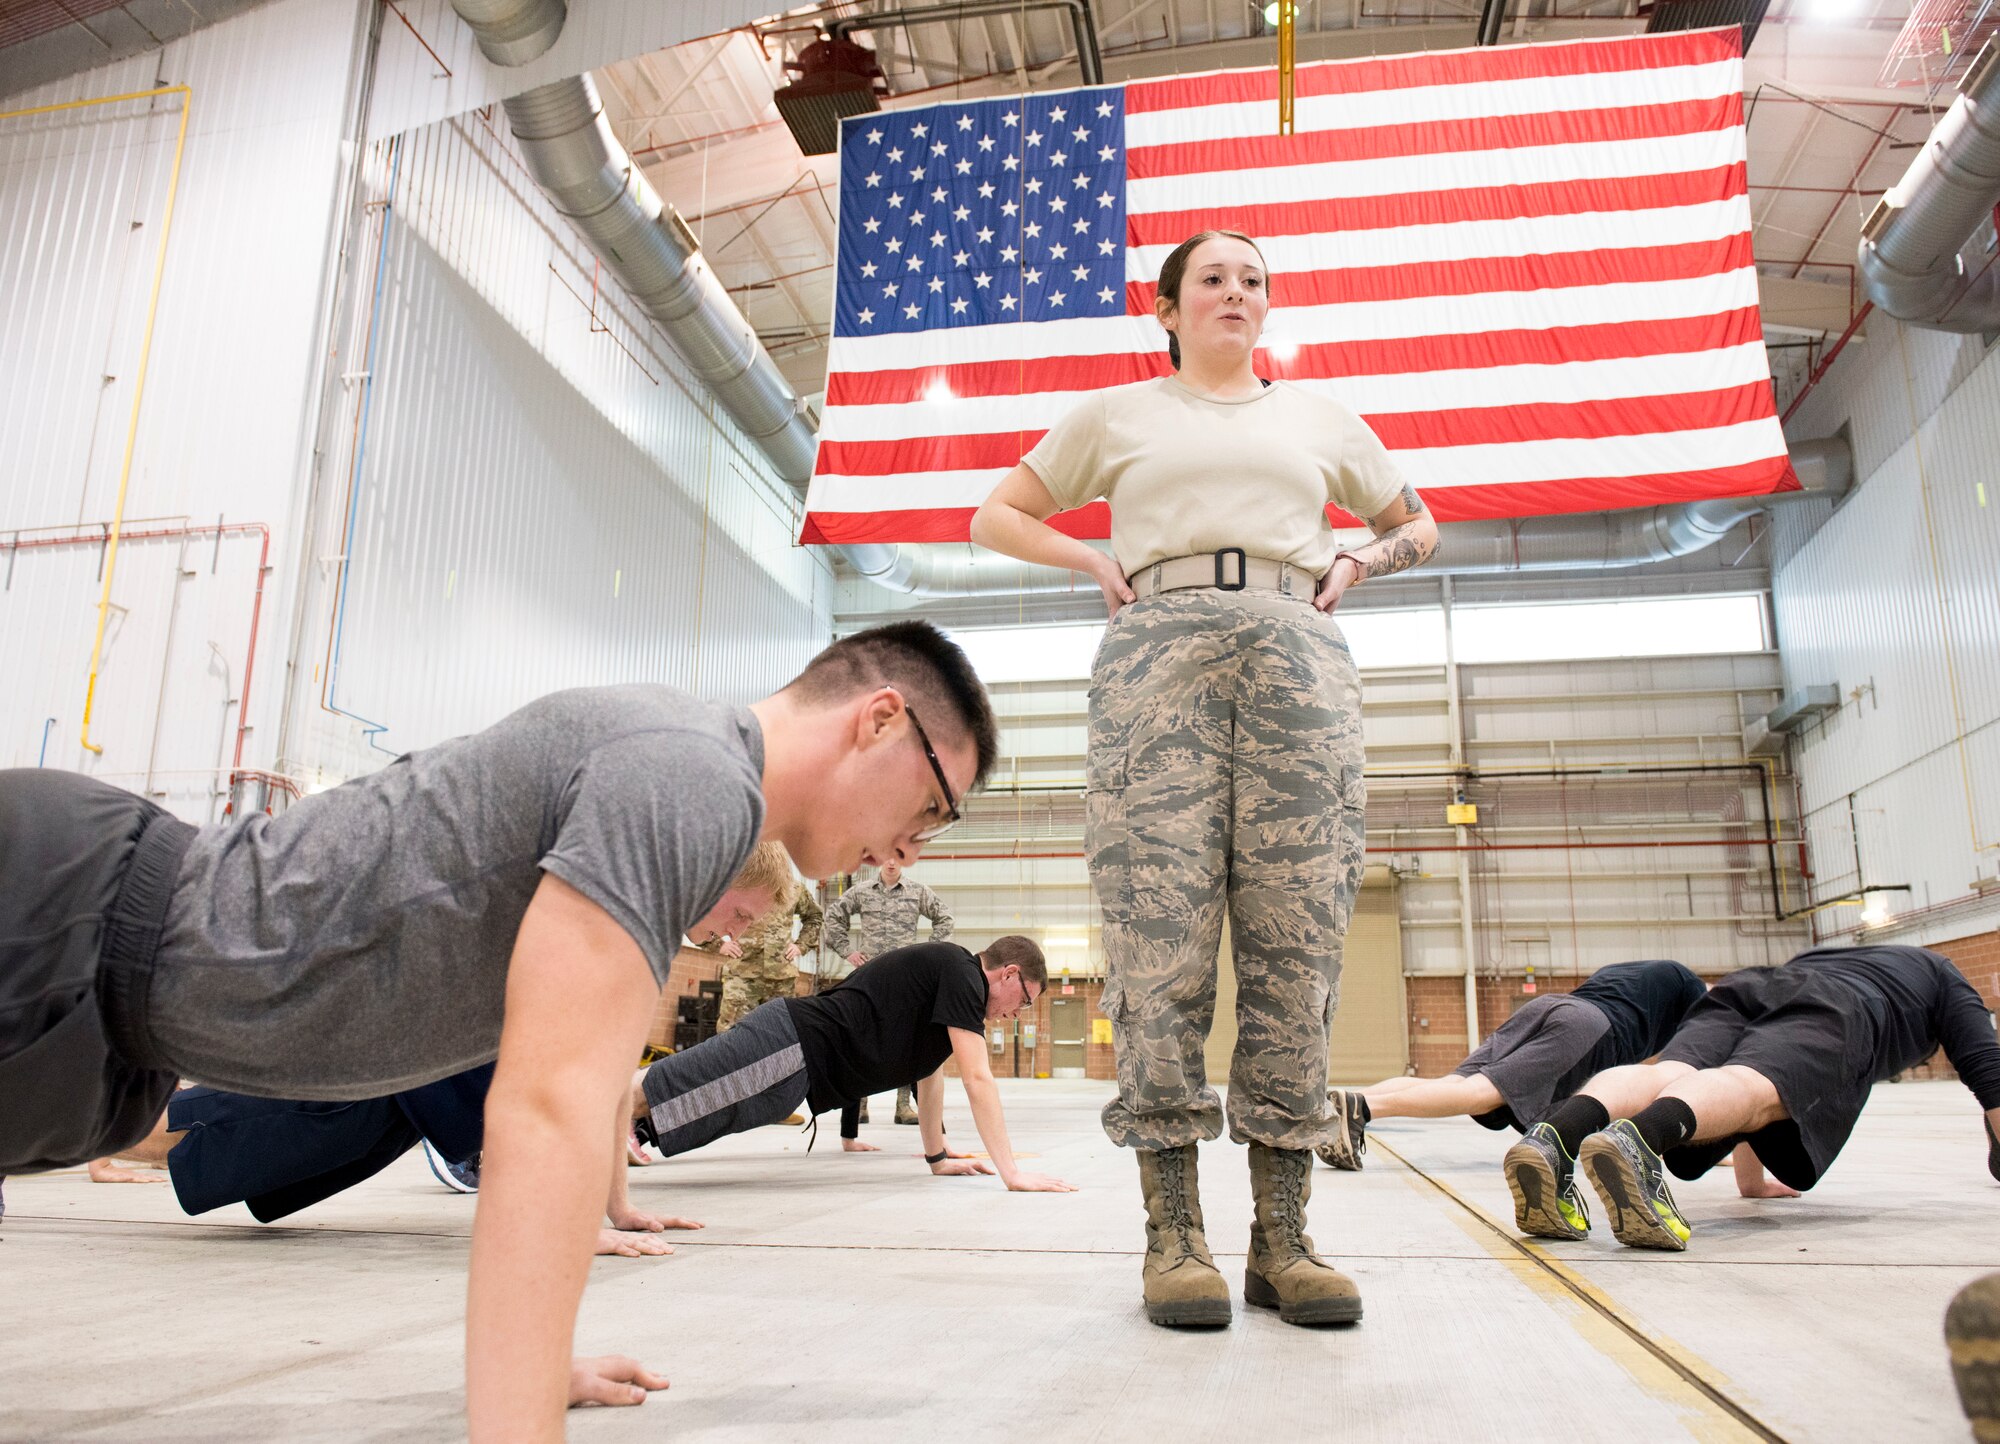 Airman 1st Class Julianne Arnold, counts reps during a physical fitness session for the Airmen in the 167th Airlift Wing's student flight program, Feb. 1, 2020. The student flight program prepares the wing's newest Airmen for U.S. Air Force basic training.